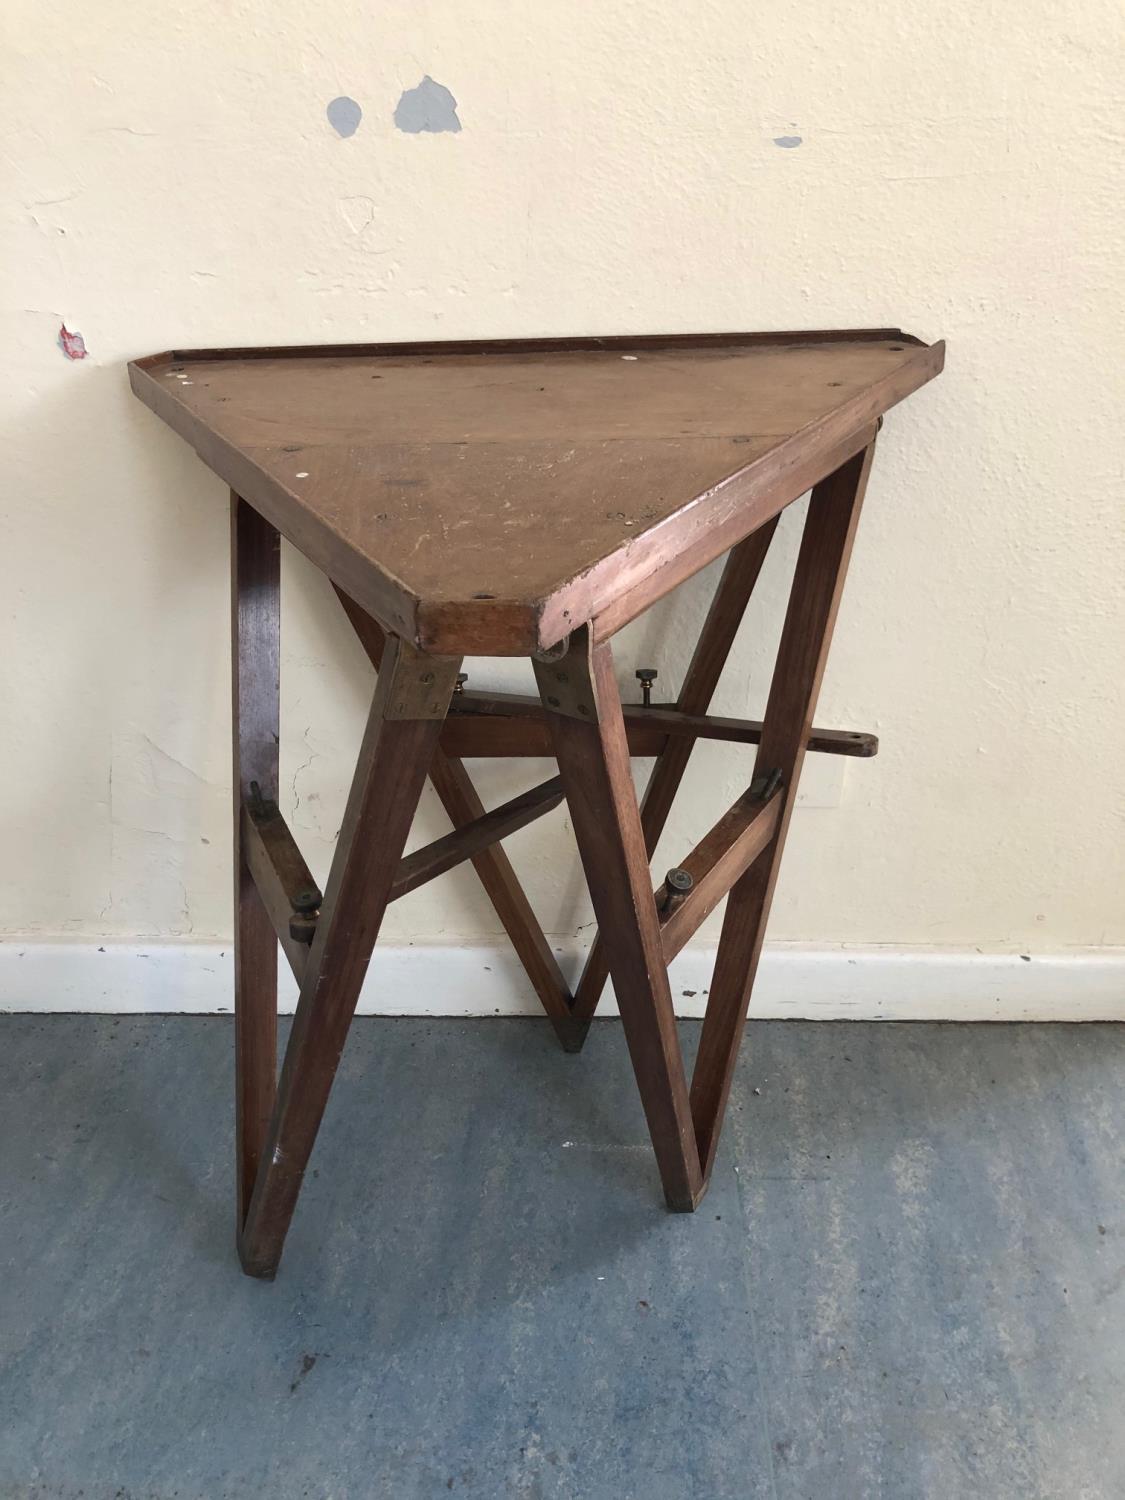 Good quality campaign style folding table with brass mounts (damage) W 65cm H 75cm - Image 2 of 2